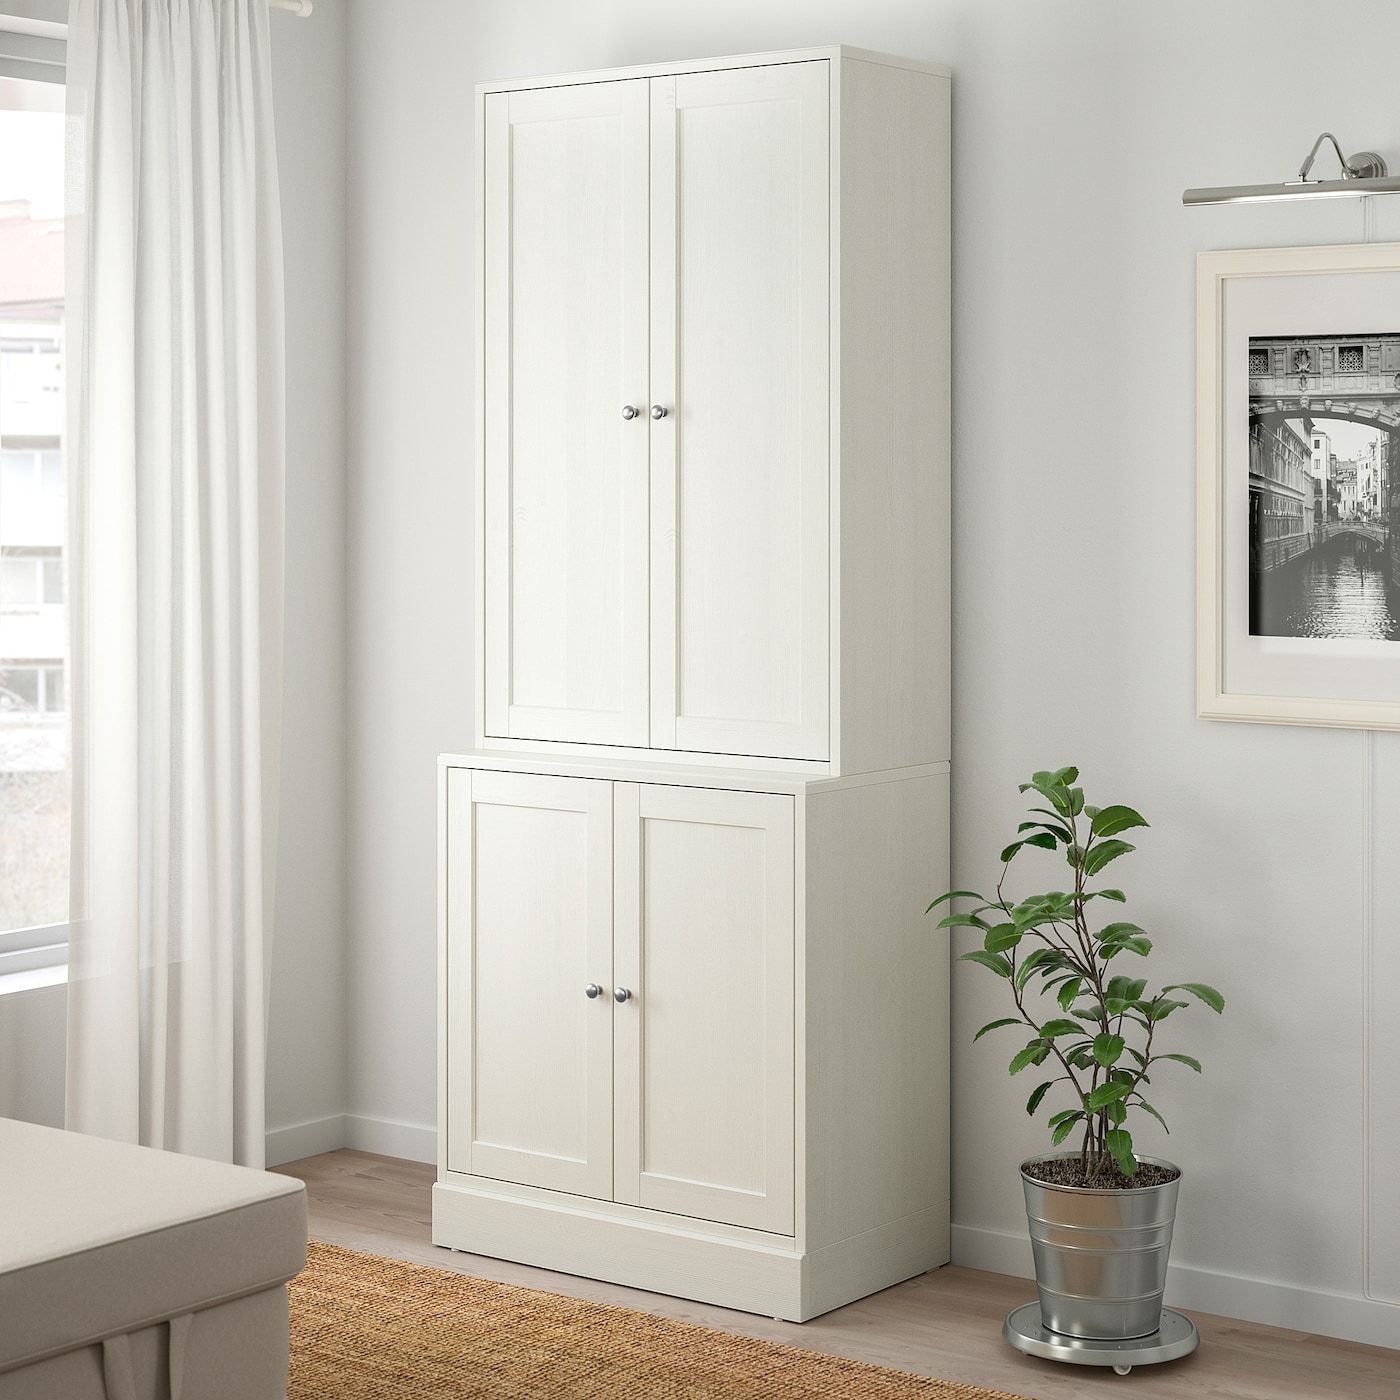 Havsta Storage Combination With Doors, White, 317/8x181/2x831/2" – Ikea Intended For 2 Separable Wardrobes (Photo 15 of 15)